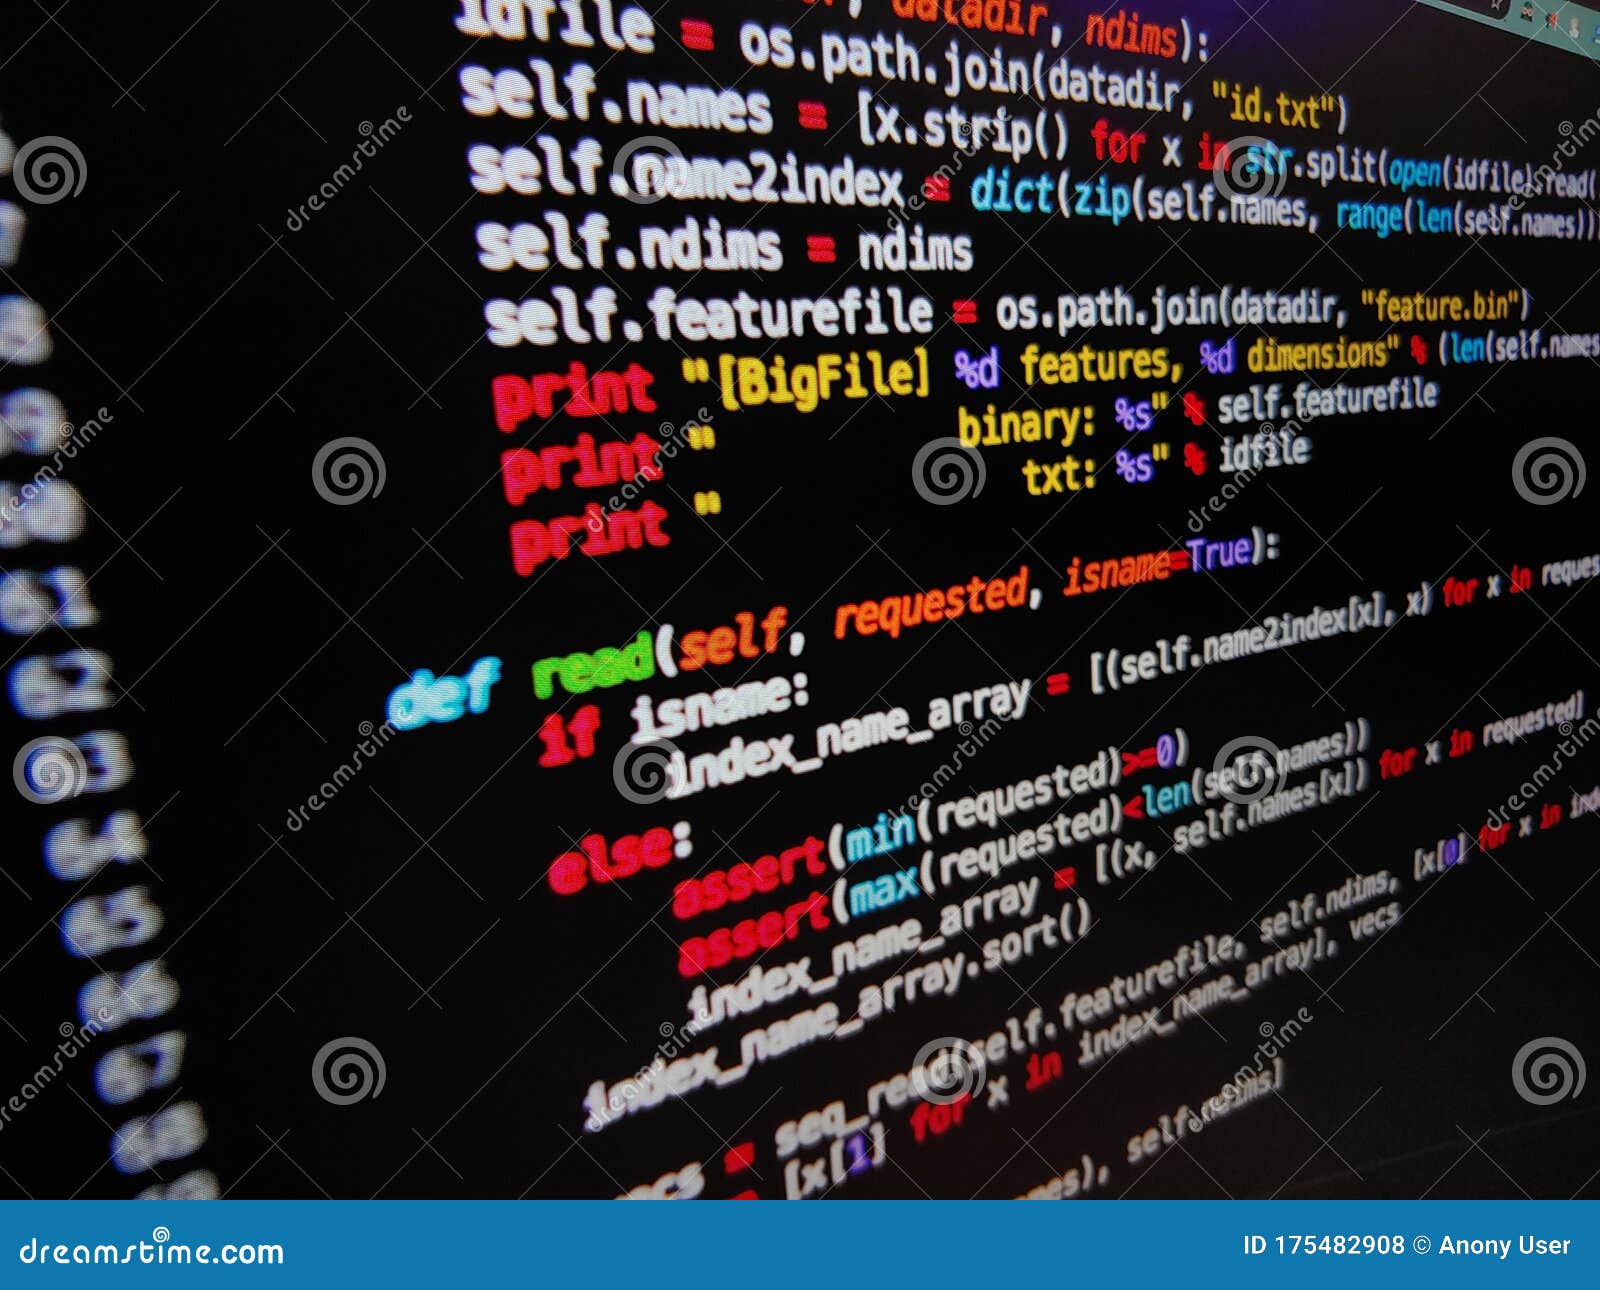 Awesome Background Wallpaper of Computer Pc Hacking Codes Scripting Hacks  Security Hacker Language Code Script Wallpapers Stock Photo - Image of  scripting, hacking: 175482908